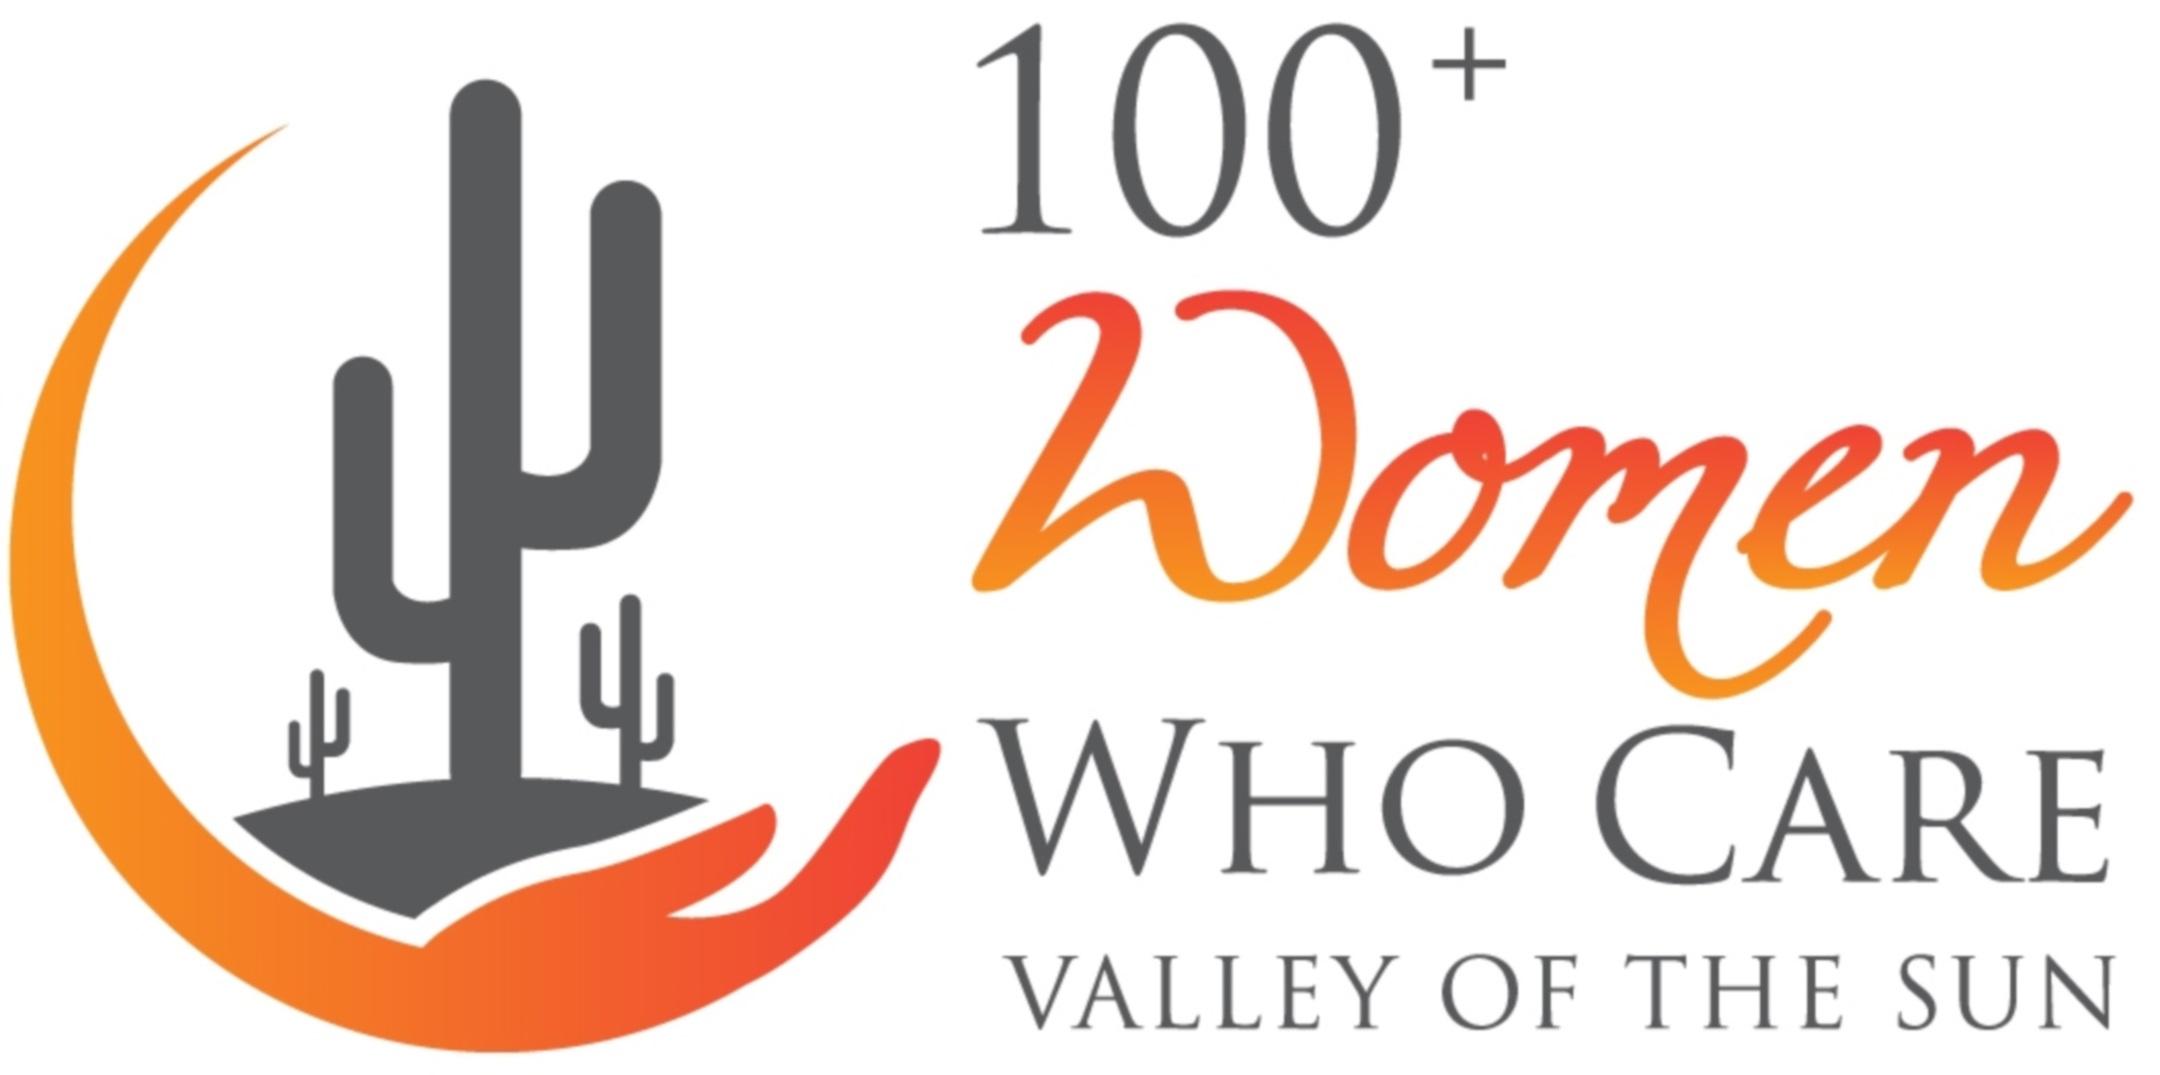 100+ Women Who Care Valley of the Sun - Q1 Giving Circle in Scottsdale 